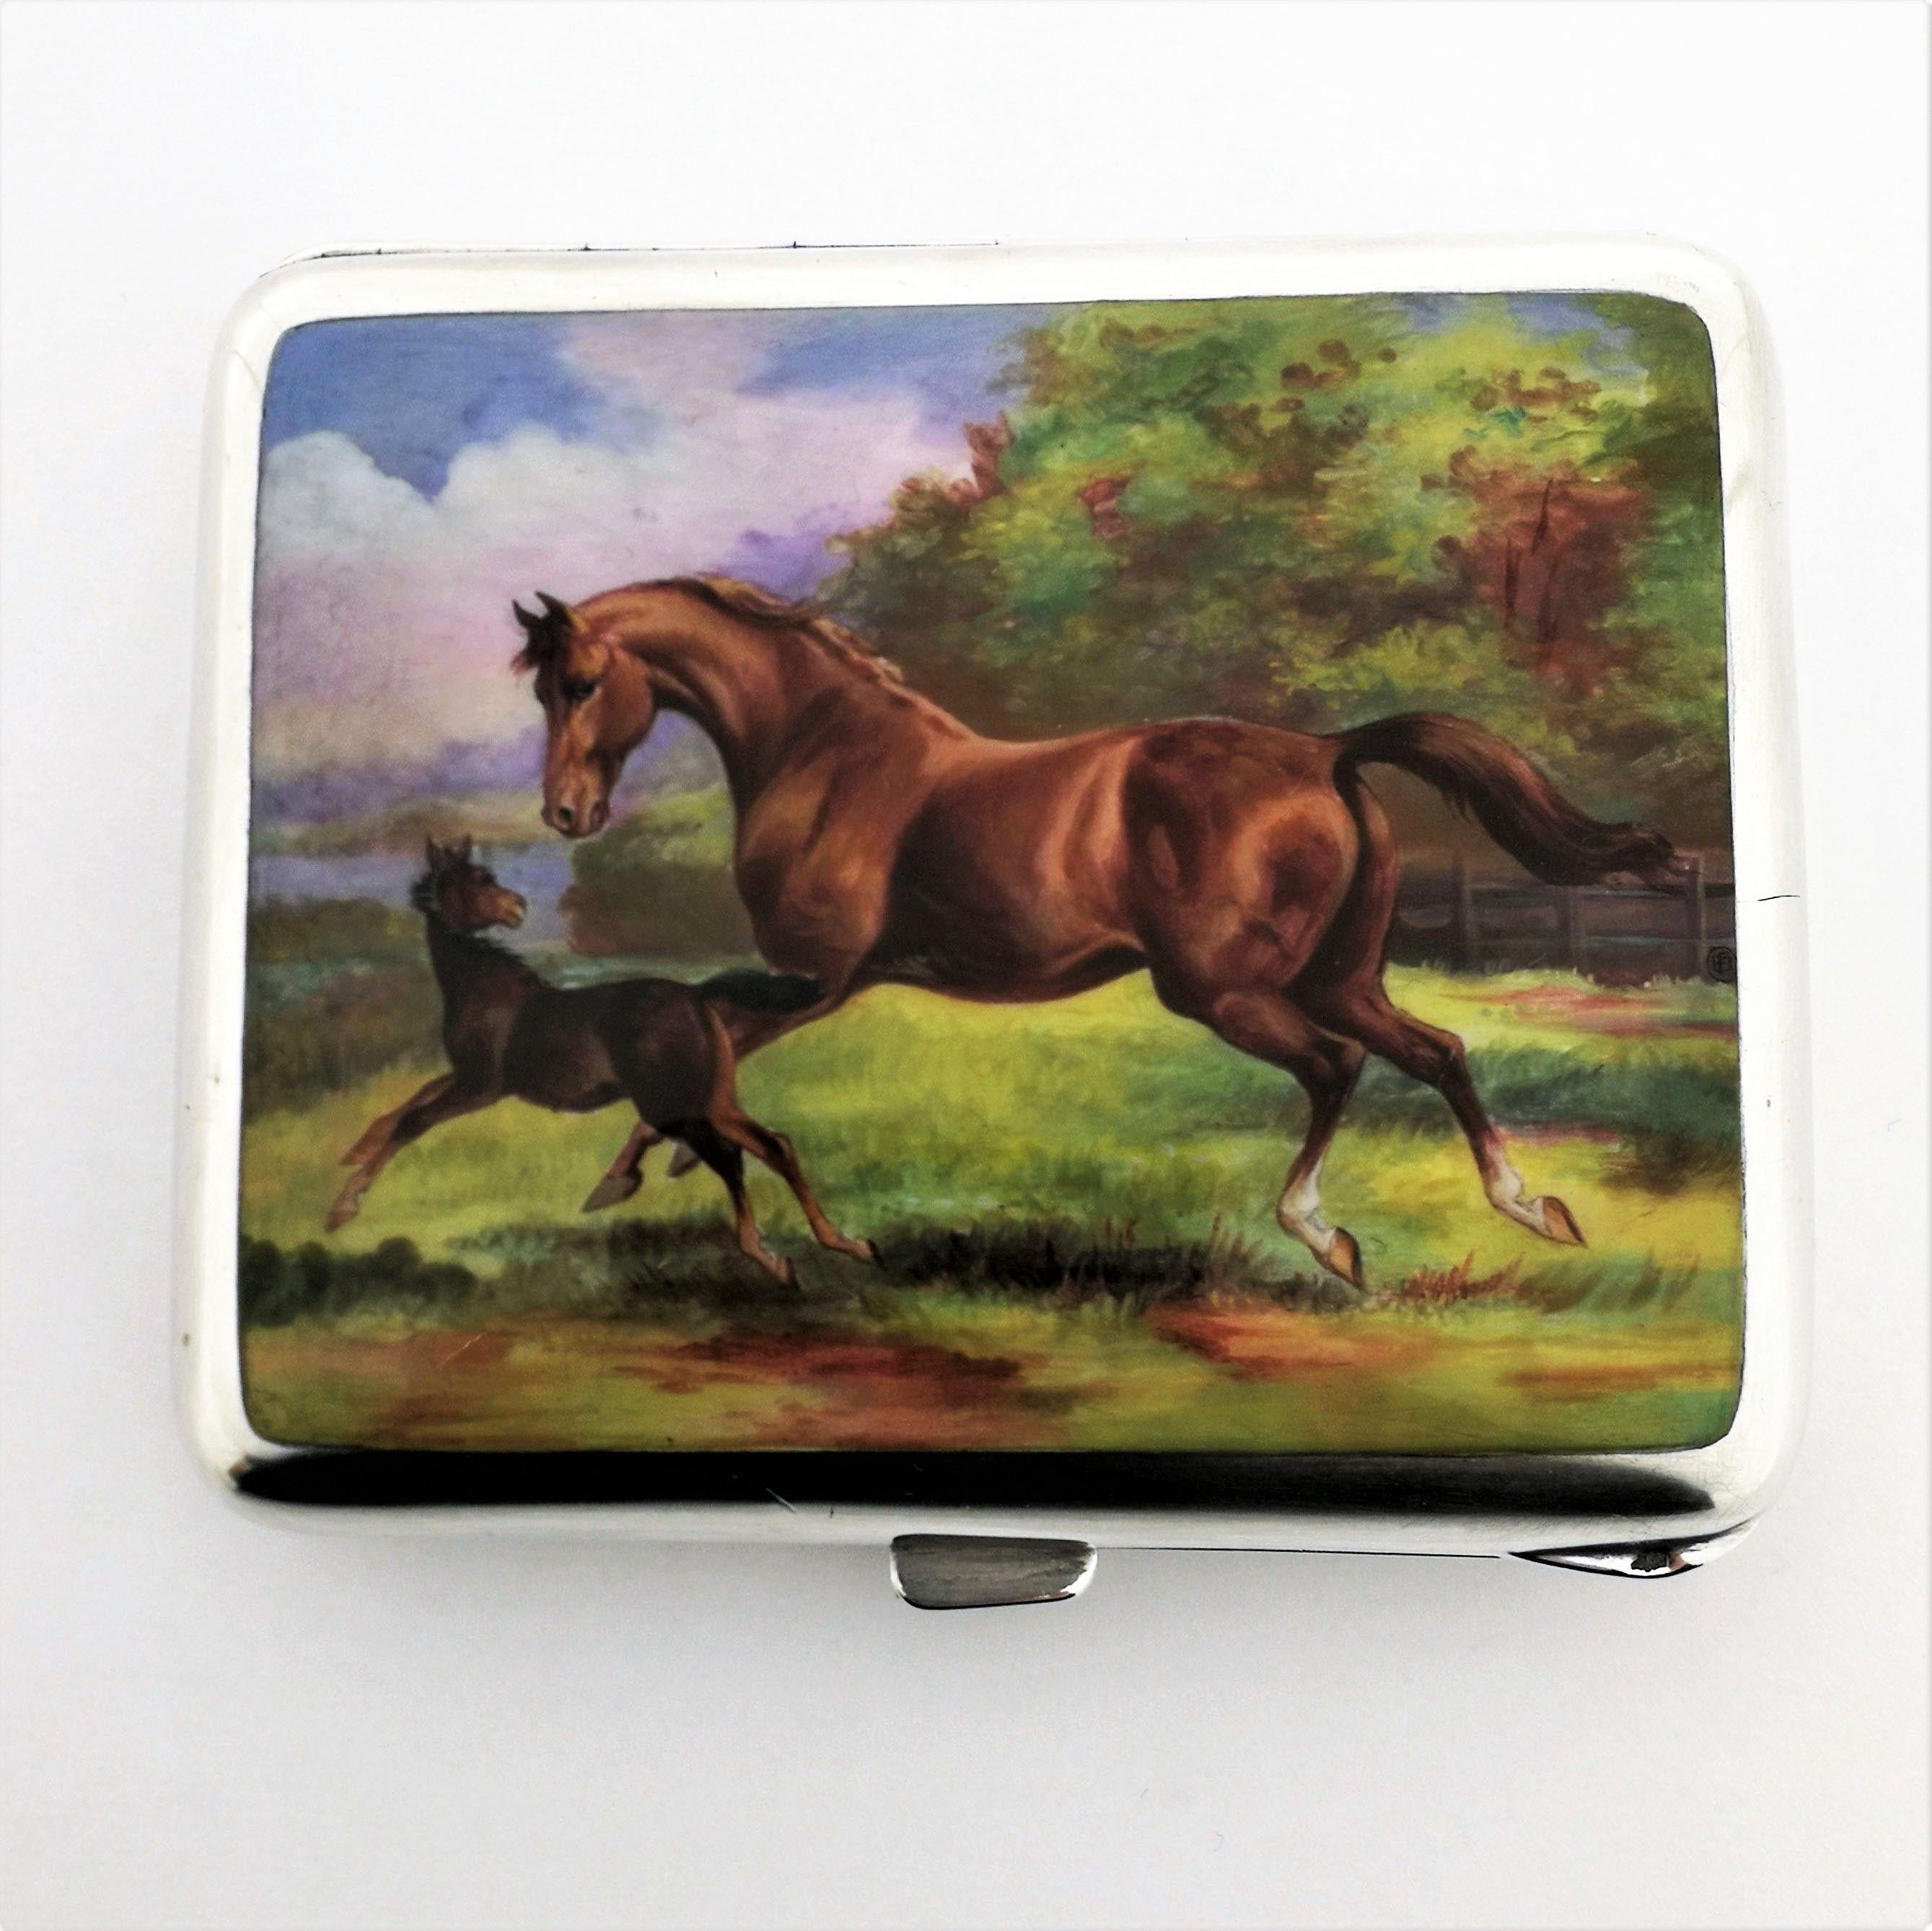 A gorgeous antique Austrian silver & enamel cigarette case. The case features a magnificent enamel scene on the front cover showing a mare and her colt cantering through the country side. The horses and landscape are created in rich, vibrant colors